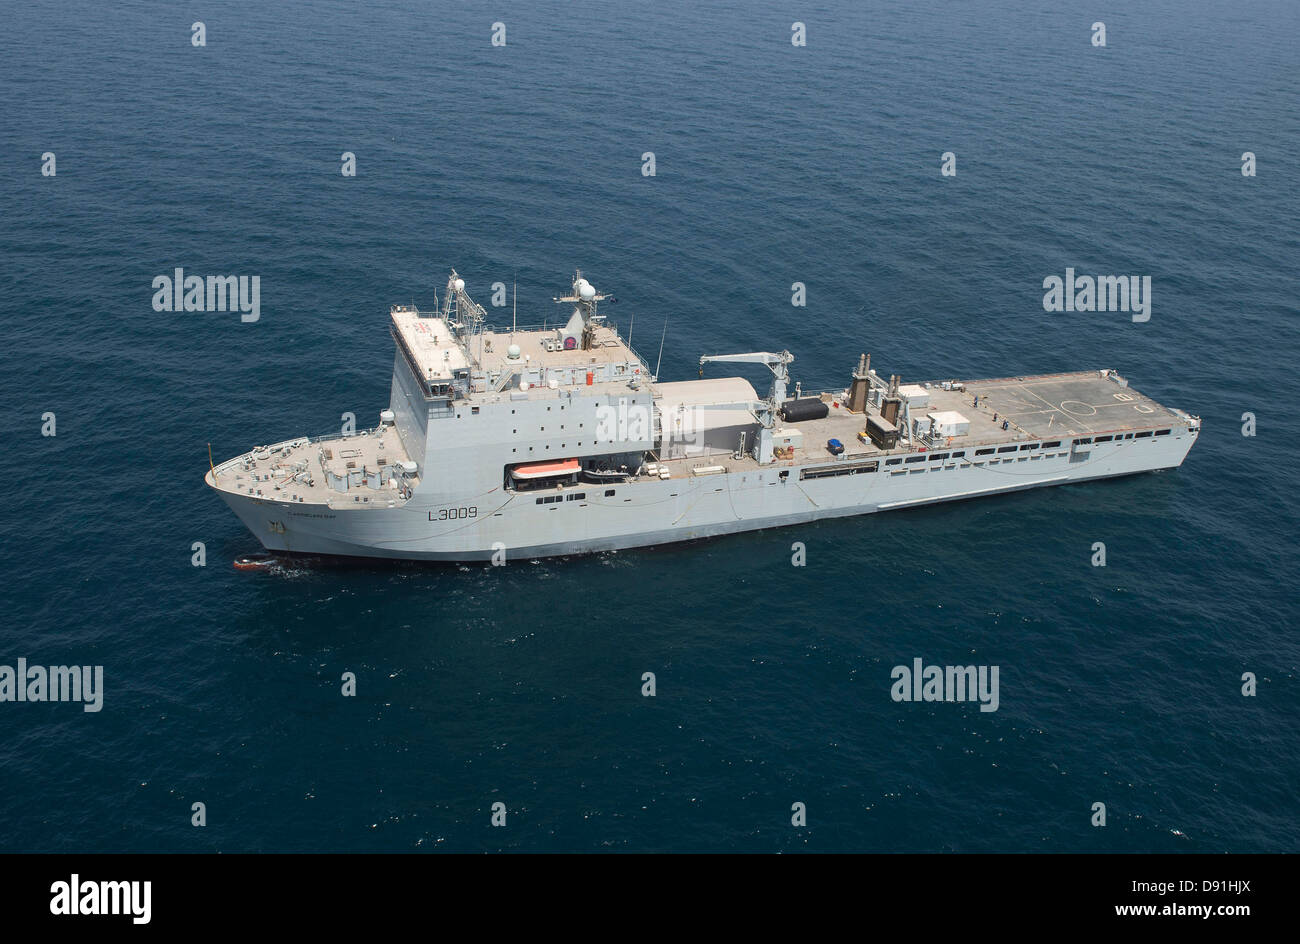 The British Royal Navy Fleet Auxiliary landing dock ship RFA Cardigan Bay maneuvers into a position during an International Mine Countermeasures Exercise May 20, 2013 in the Persian Gulf. Stock Photo